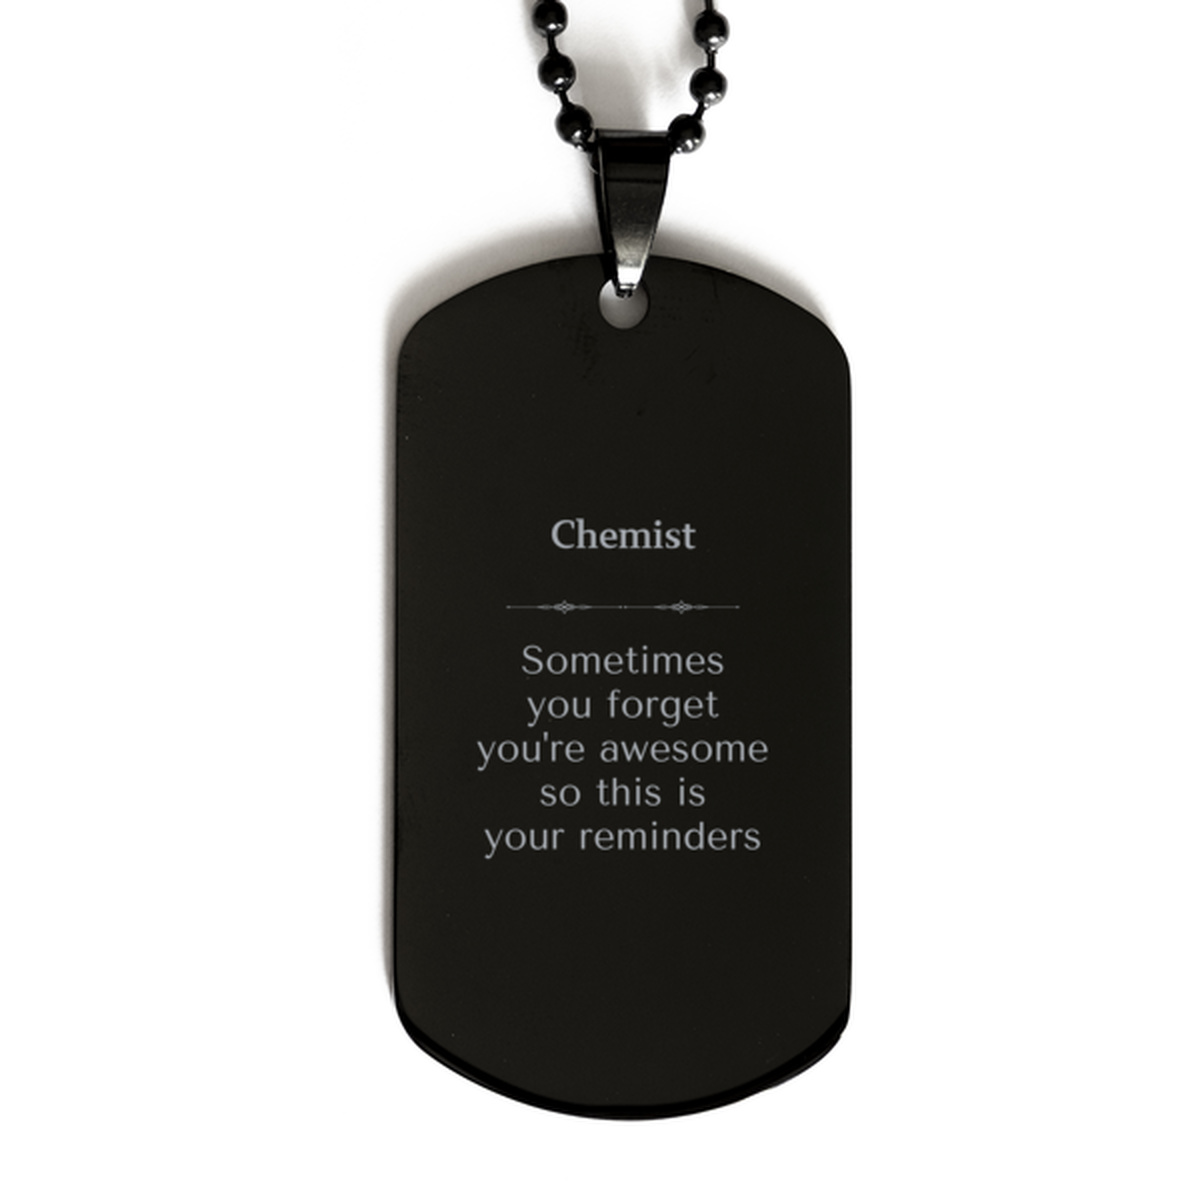 Sentimental Chemist Black Dog Tag, Chemist Sometimes you forget you're awesome so this is your reminders, Graduation Christmas Birthday Gifts for Chemist, Men, Women, Coworkers